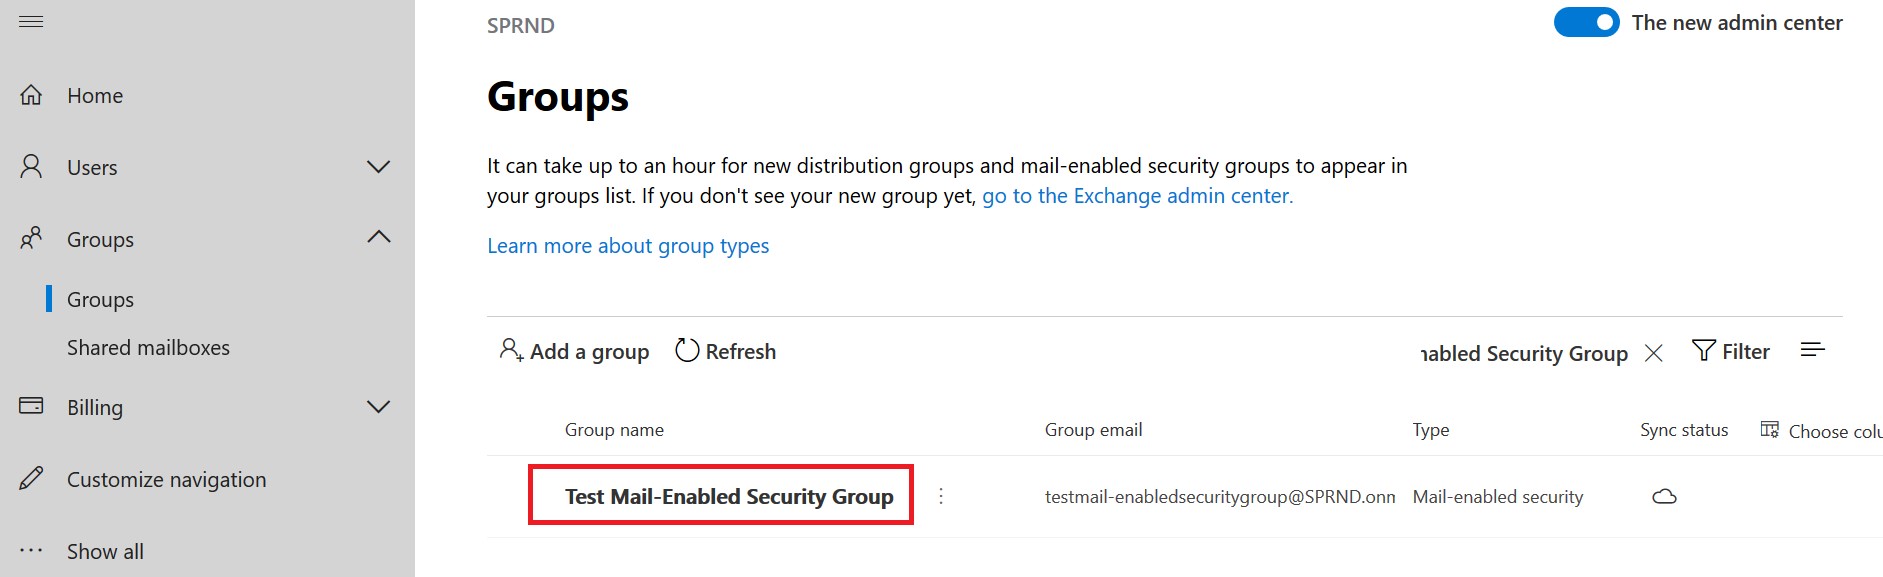 Mail-enabled security group in SharePoint Online